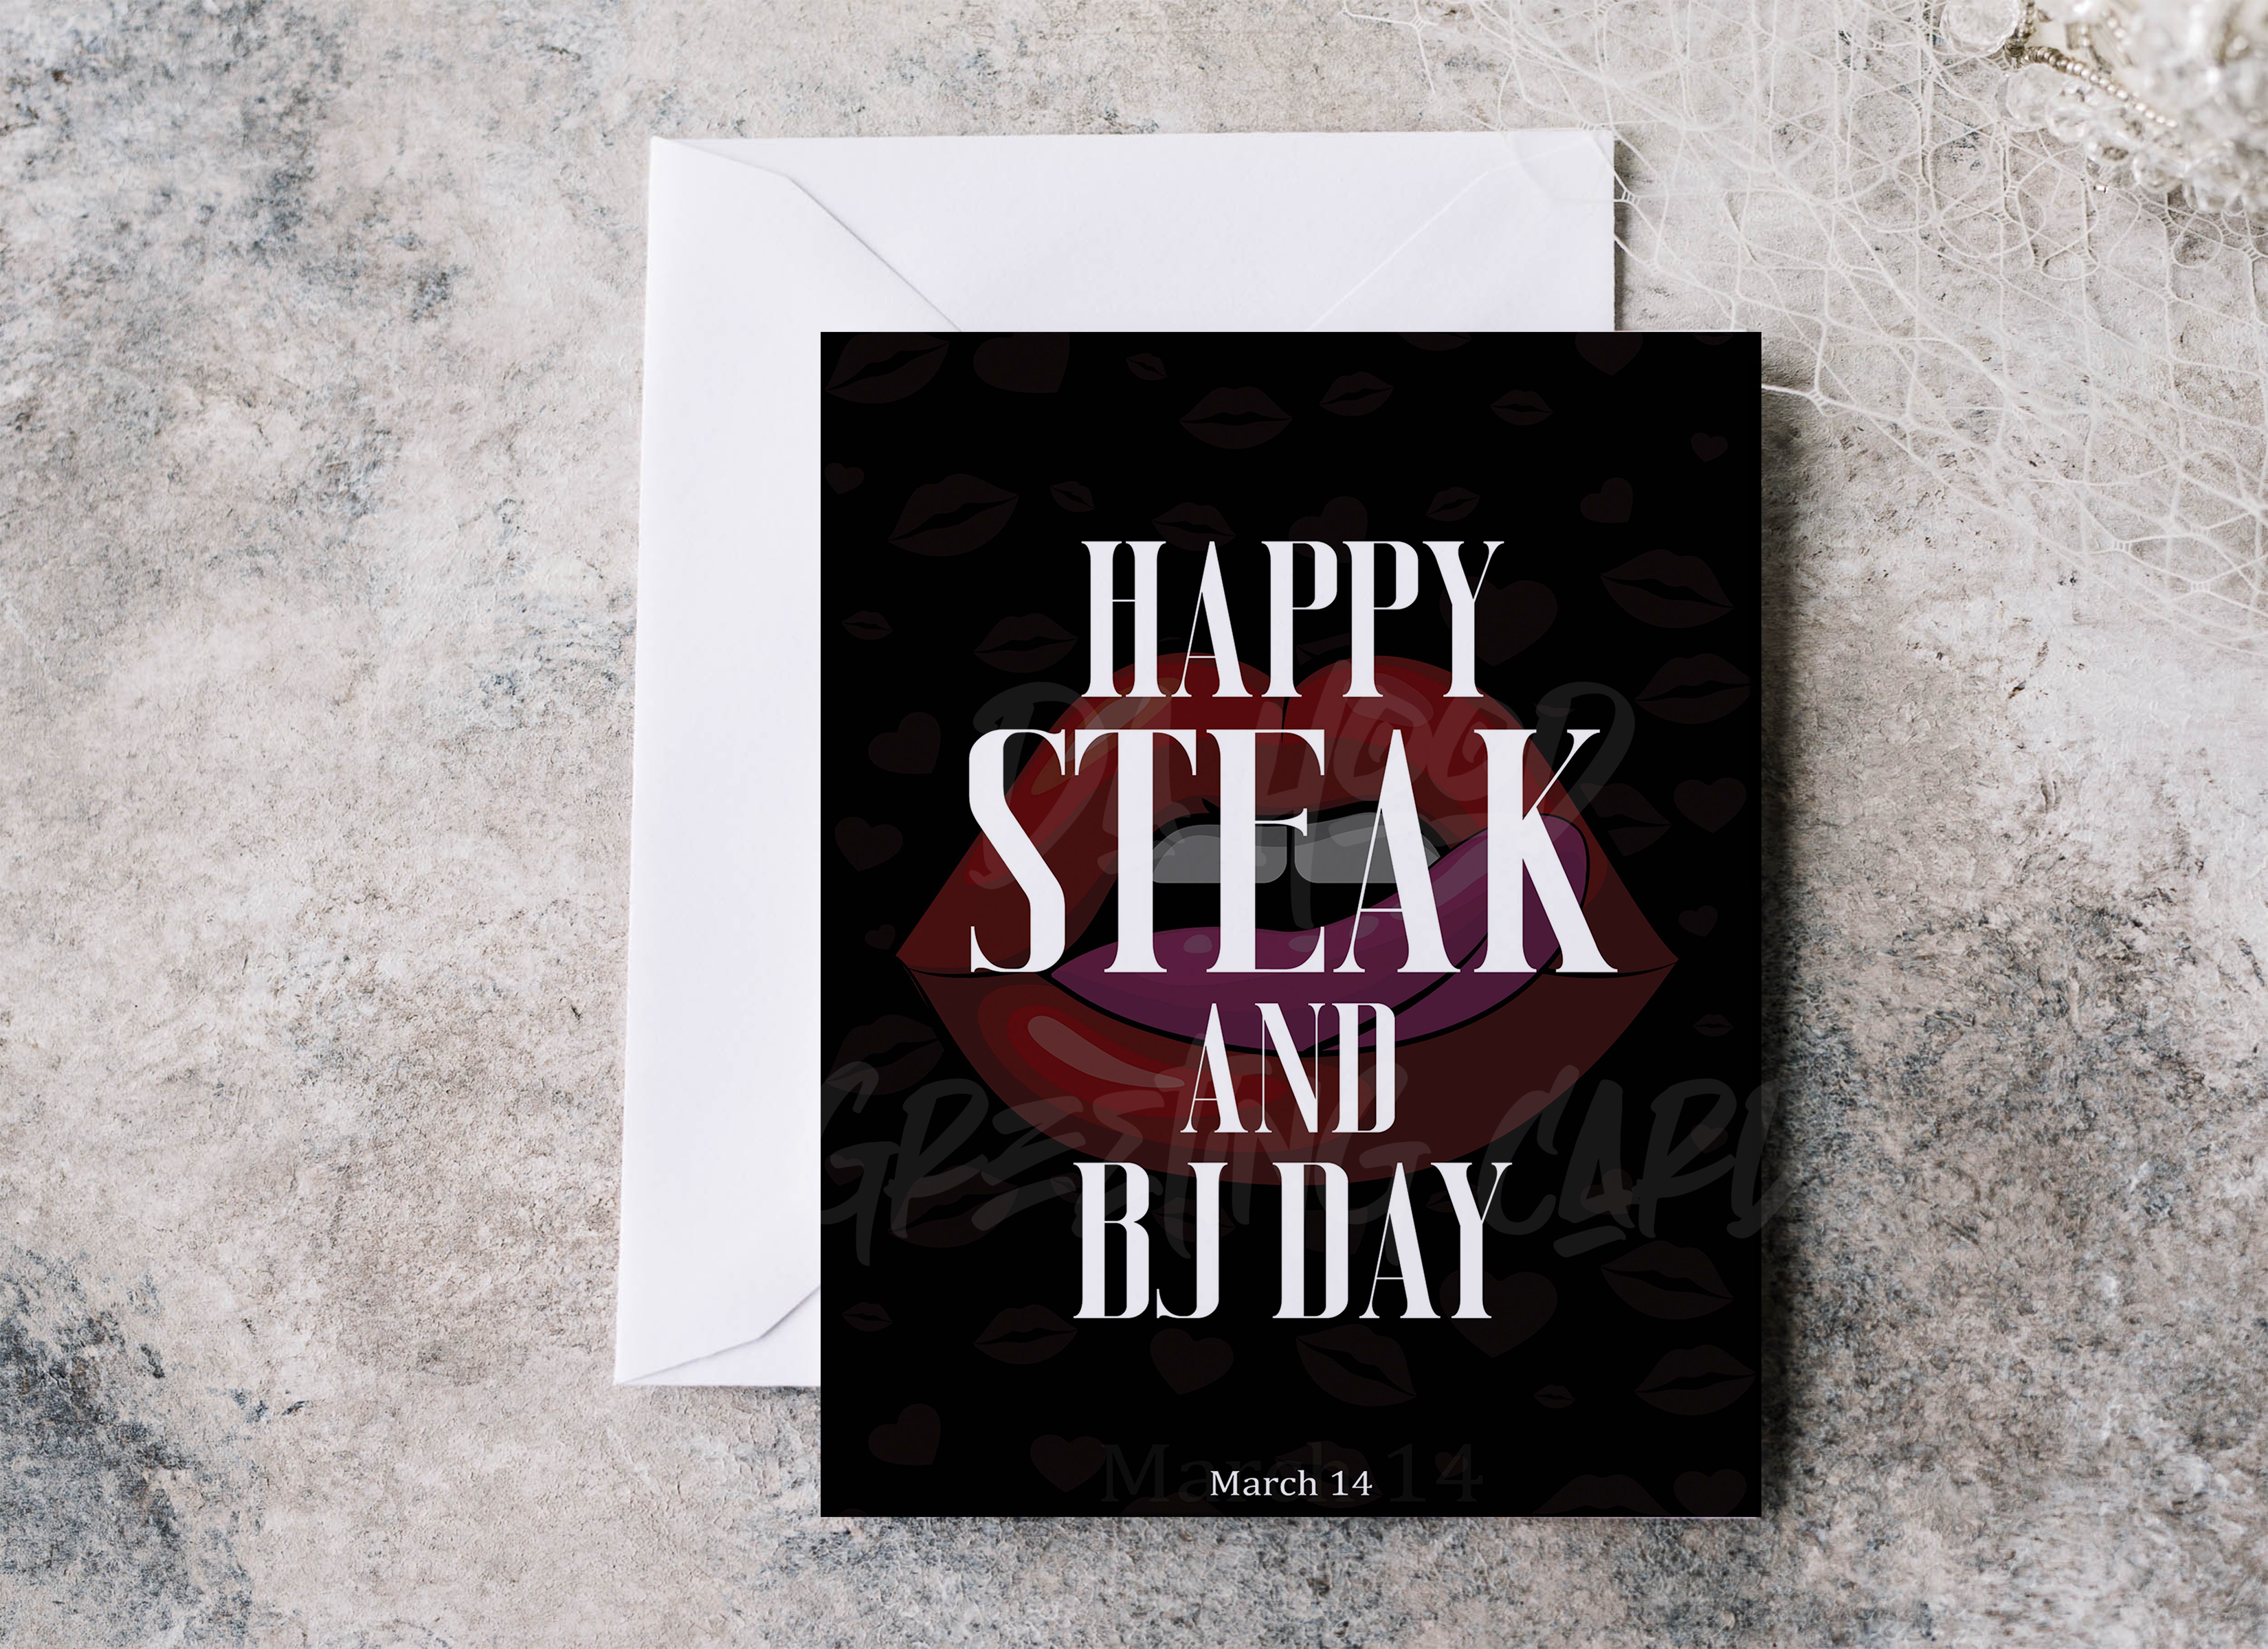 aloosh hamad recommends steak and bj day images pic